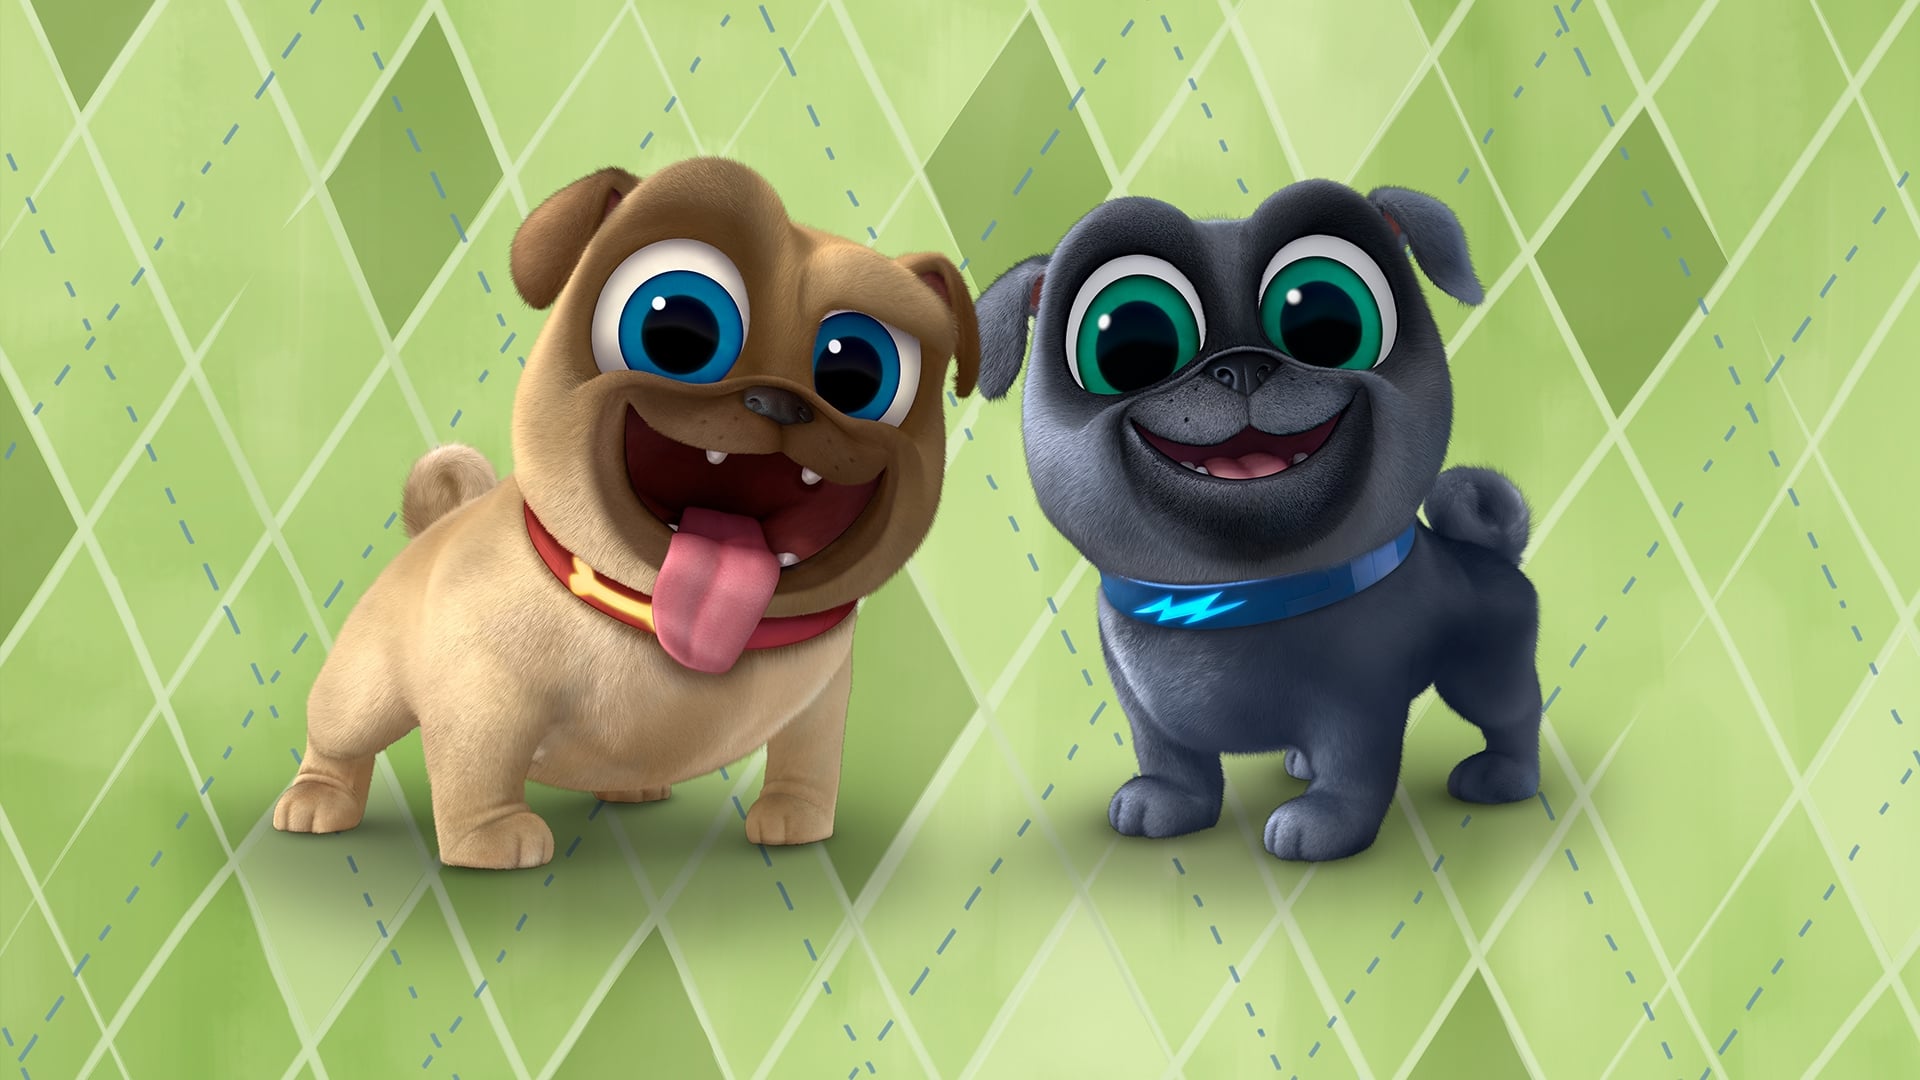 Puppy Dog Pals Colorful Backdrop Puppy Dogs Party Banner Etsy Dog - Riset